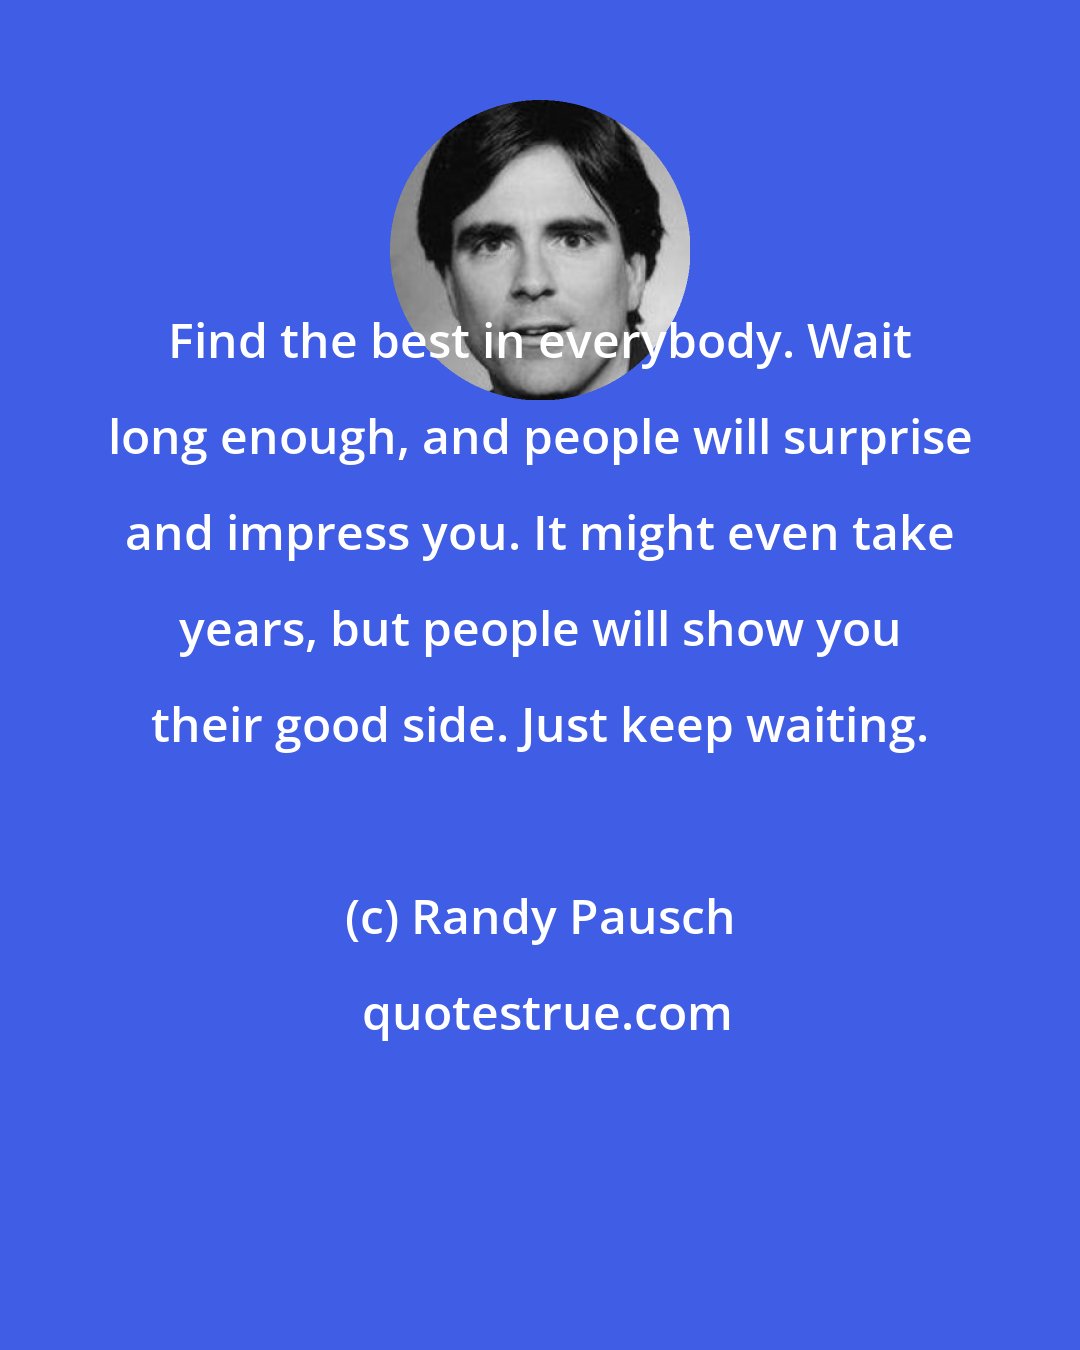 Randy Pausch: Find the best in everybody. Wait long enough, and people will surprise and impress you. It might even take years, but people will show you their good side. Just keep waiting.